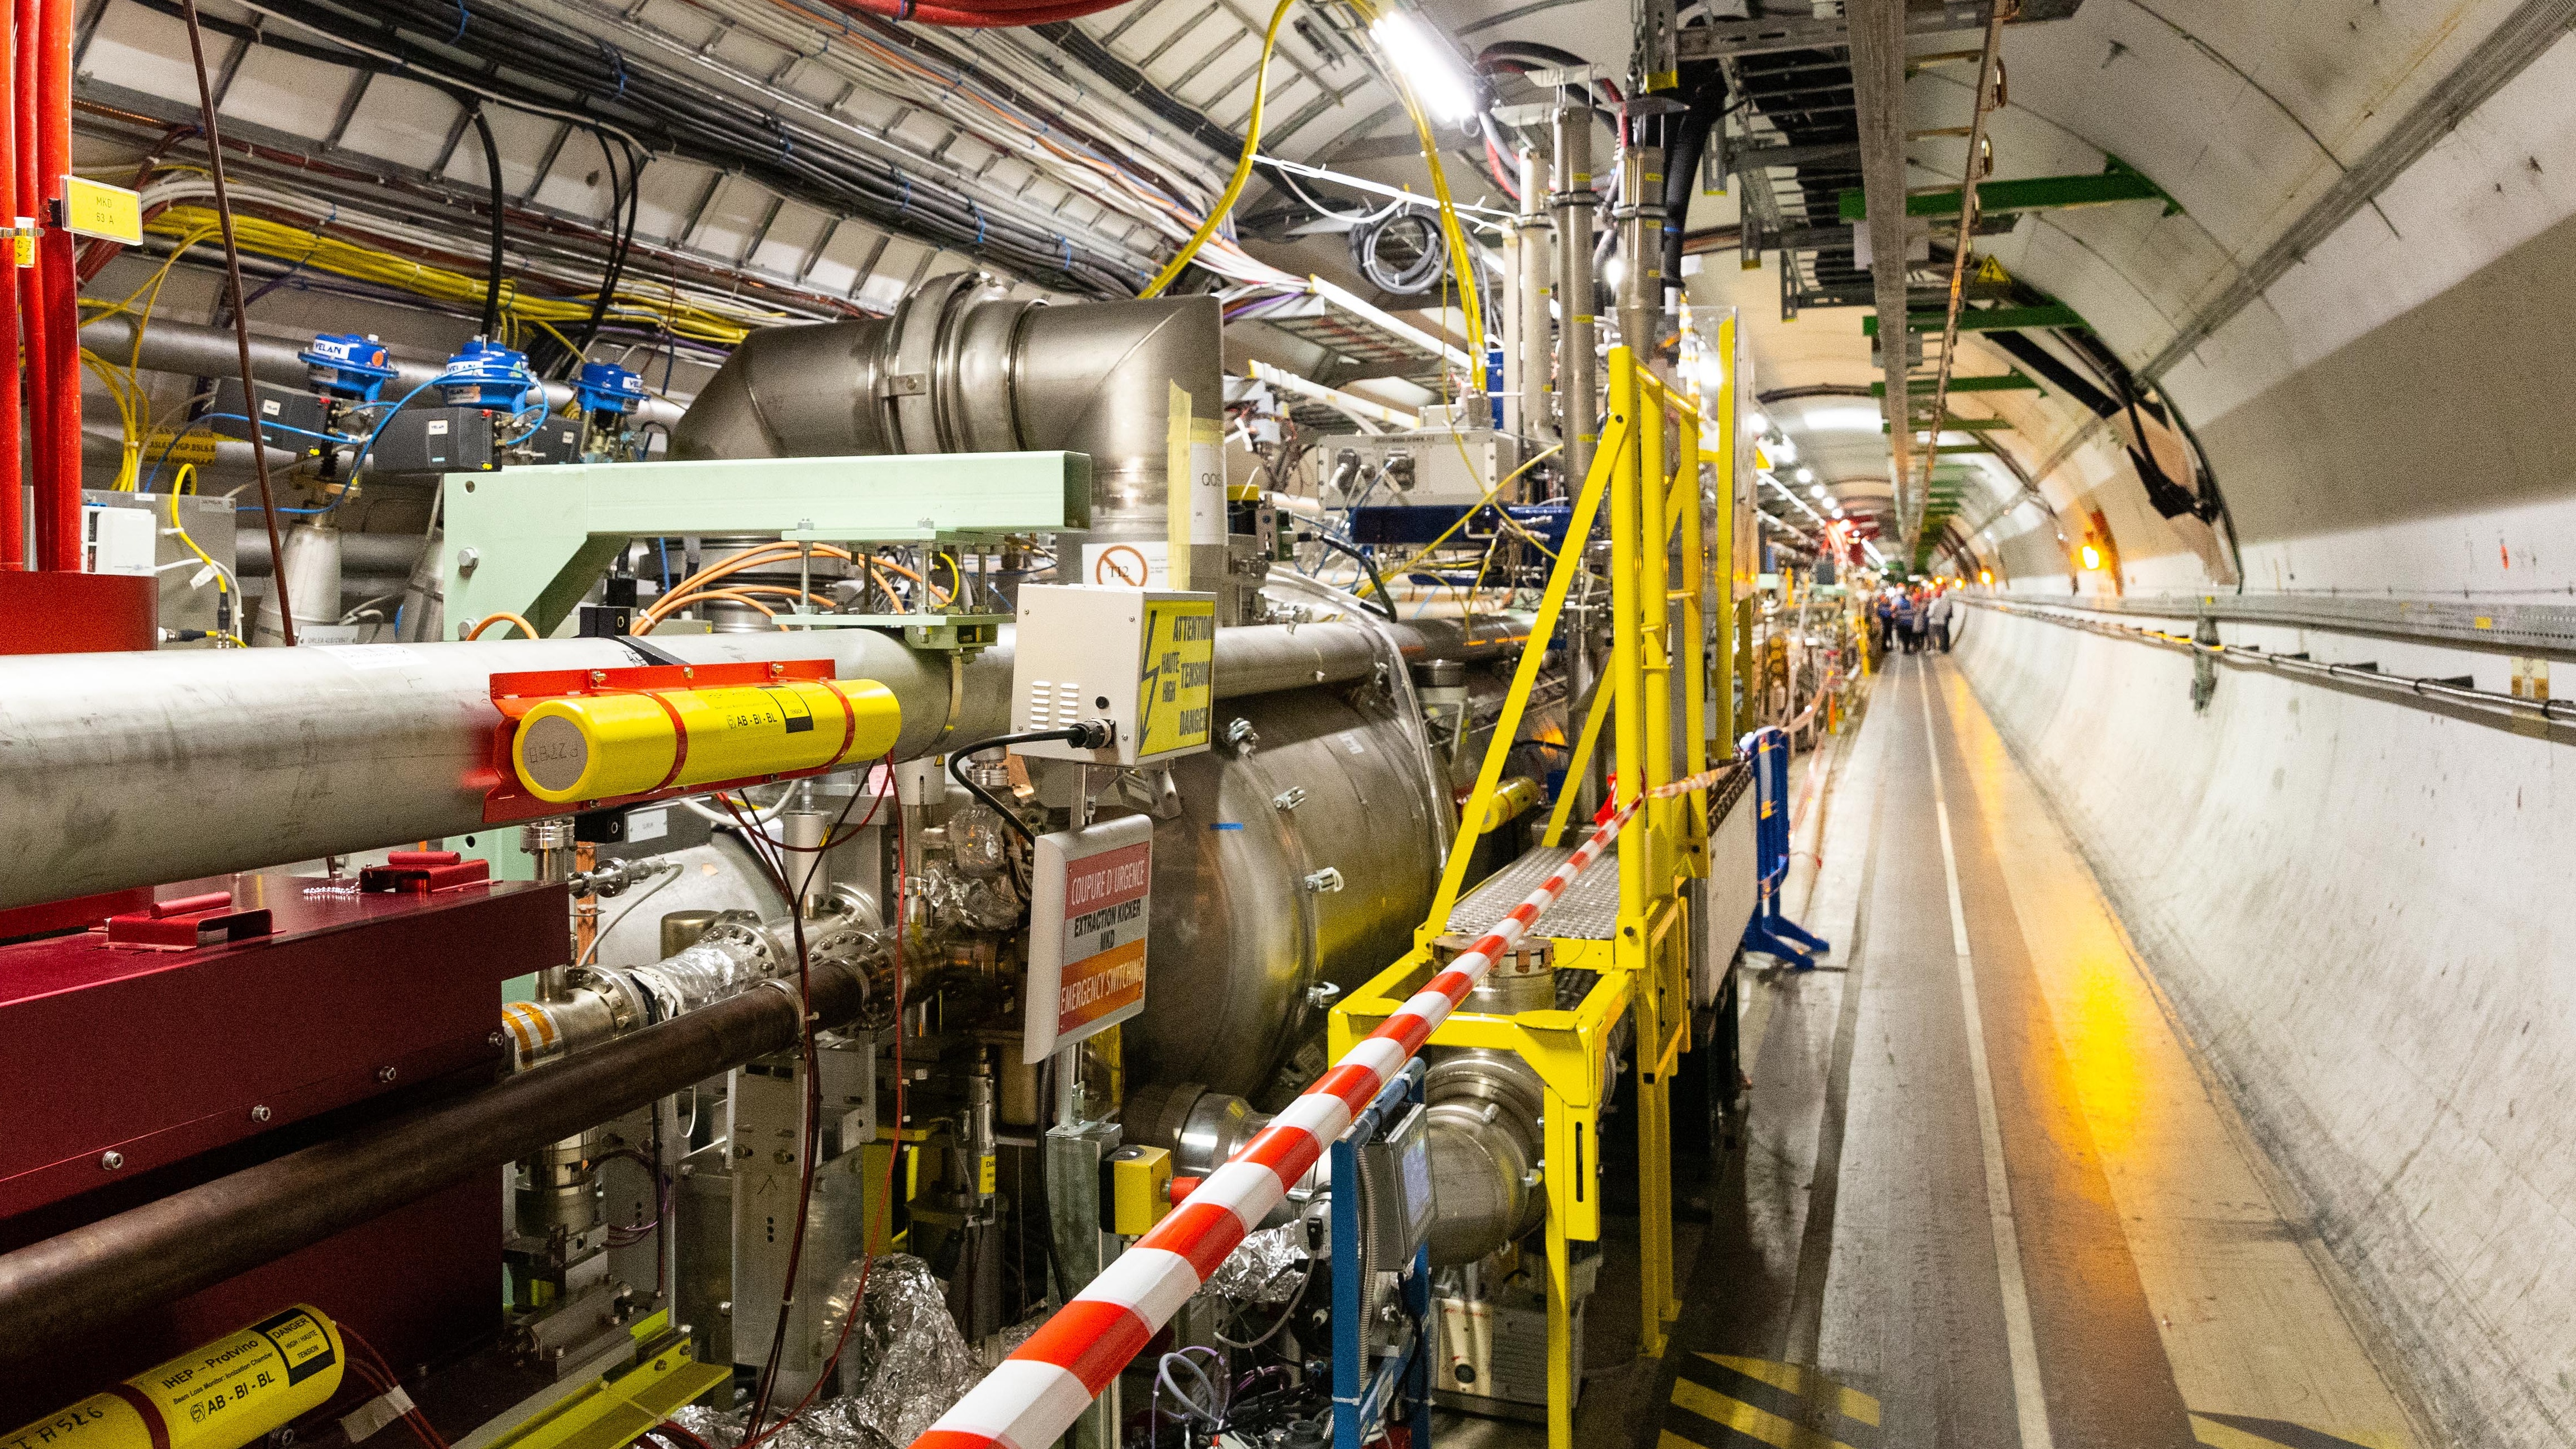 Inside the Large Hadron Collider, a particle accelerator in Meyrin, Switzerland